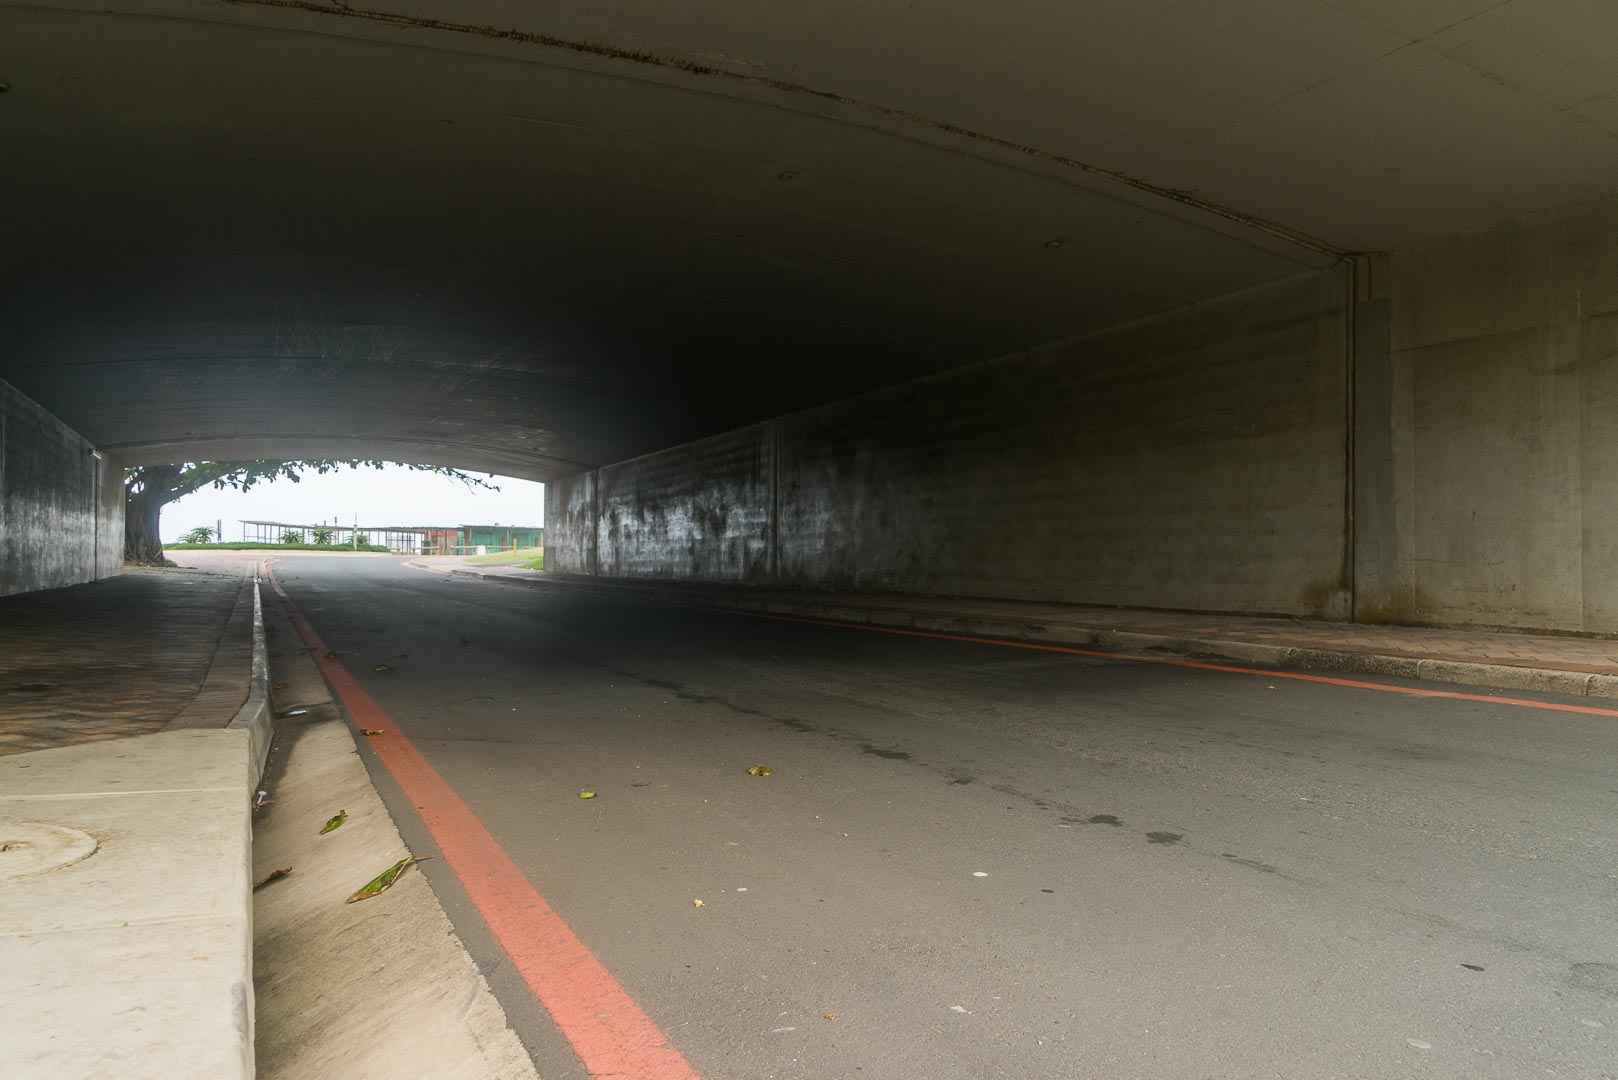 Backplate • ID: 14075 • HDRI Haven - Road Underpass